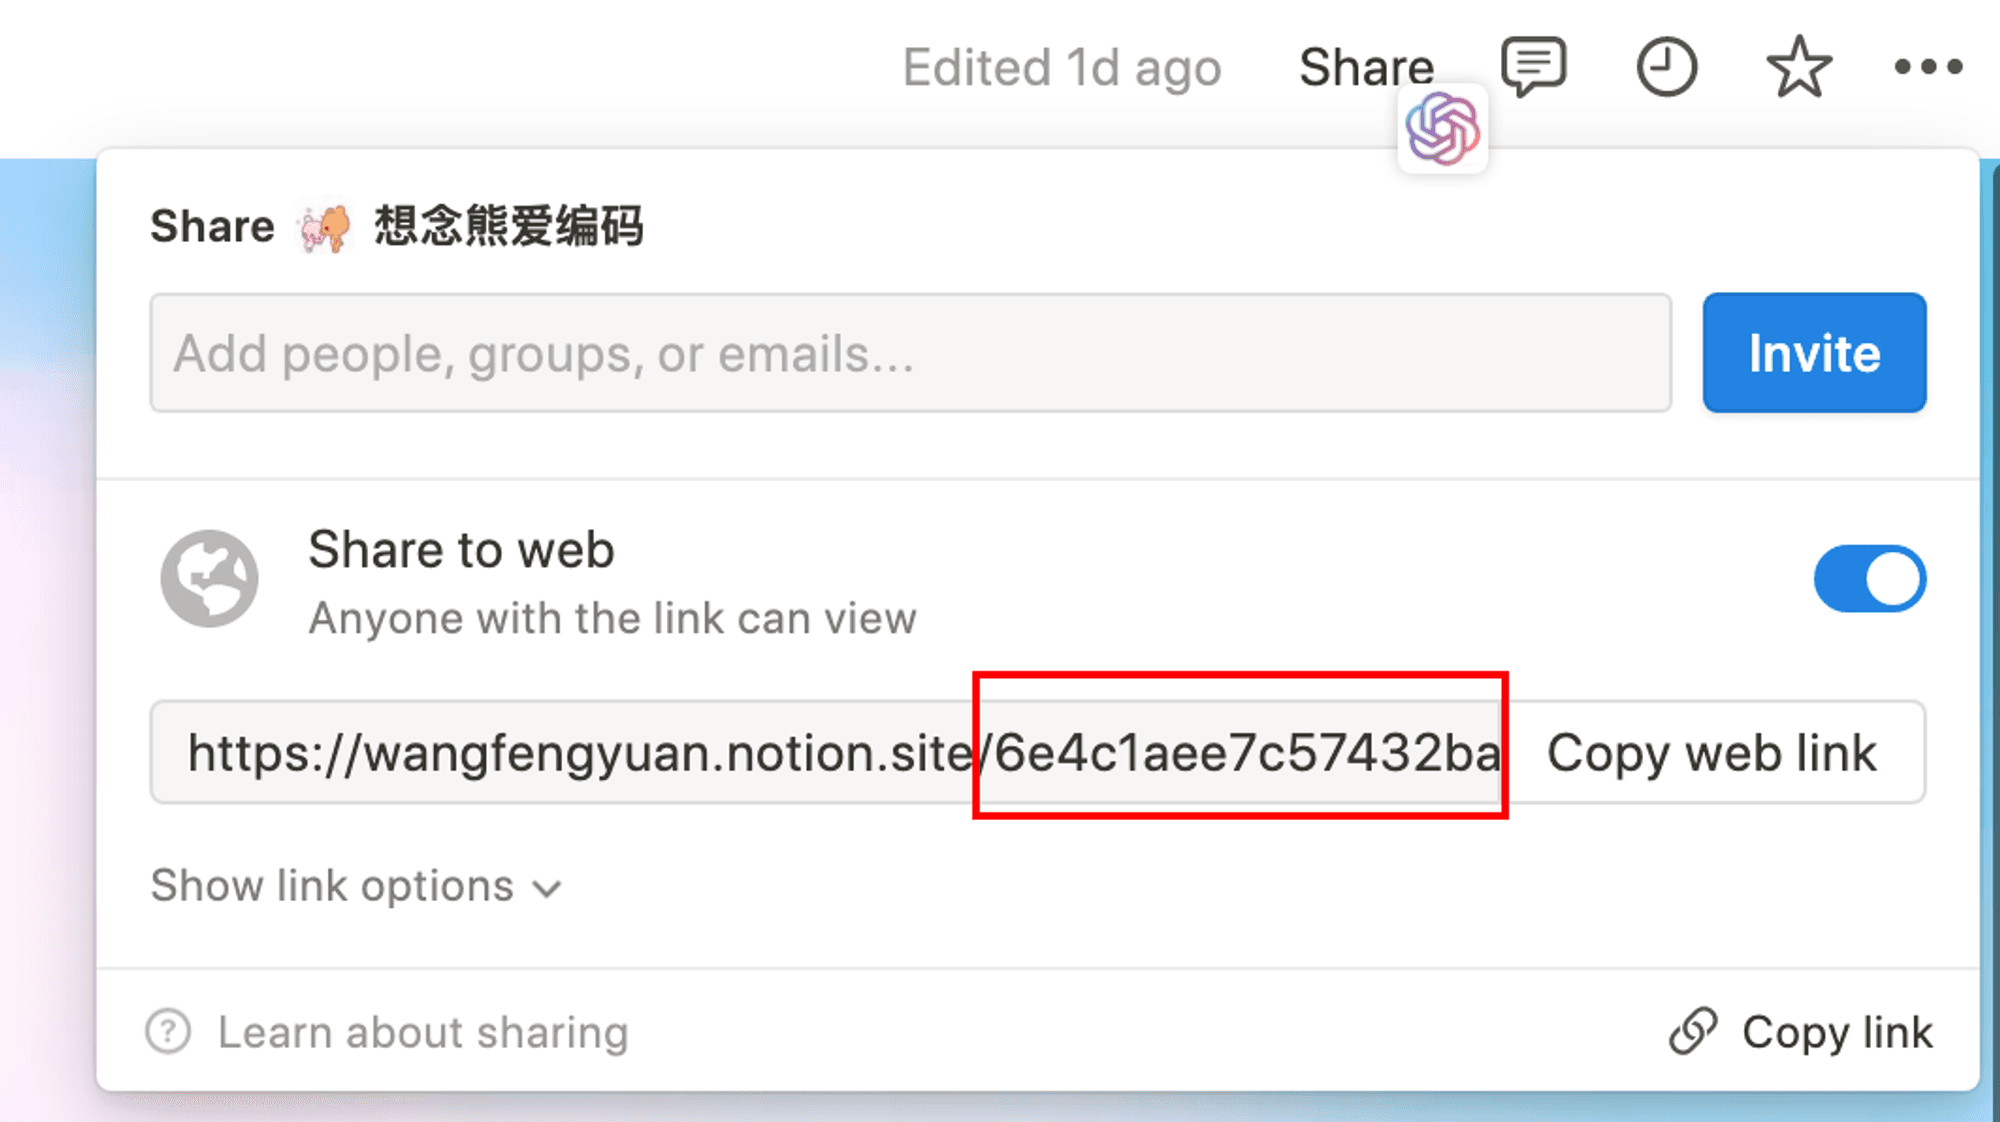 Notion页面右上角的 Share→ Share to web